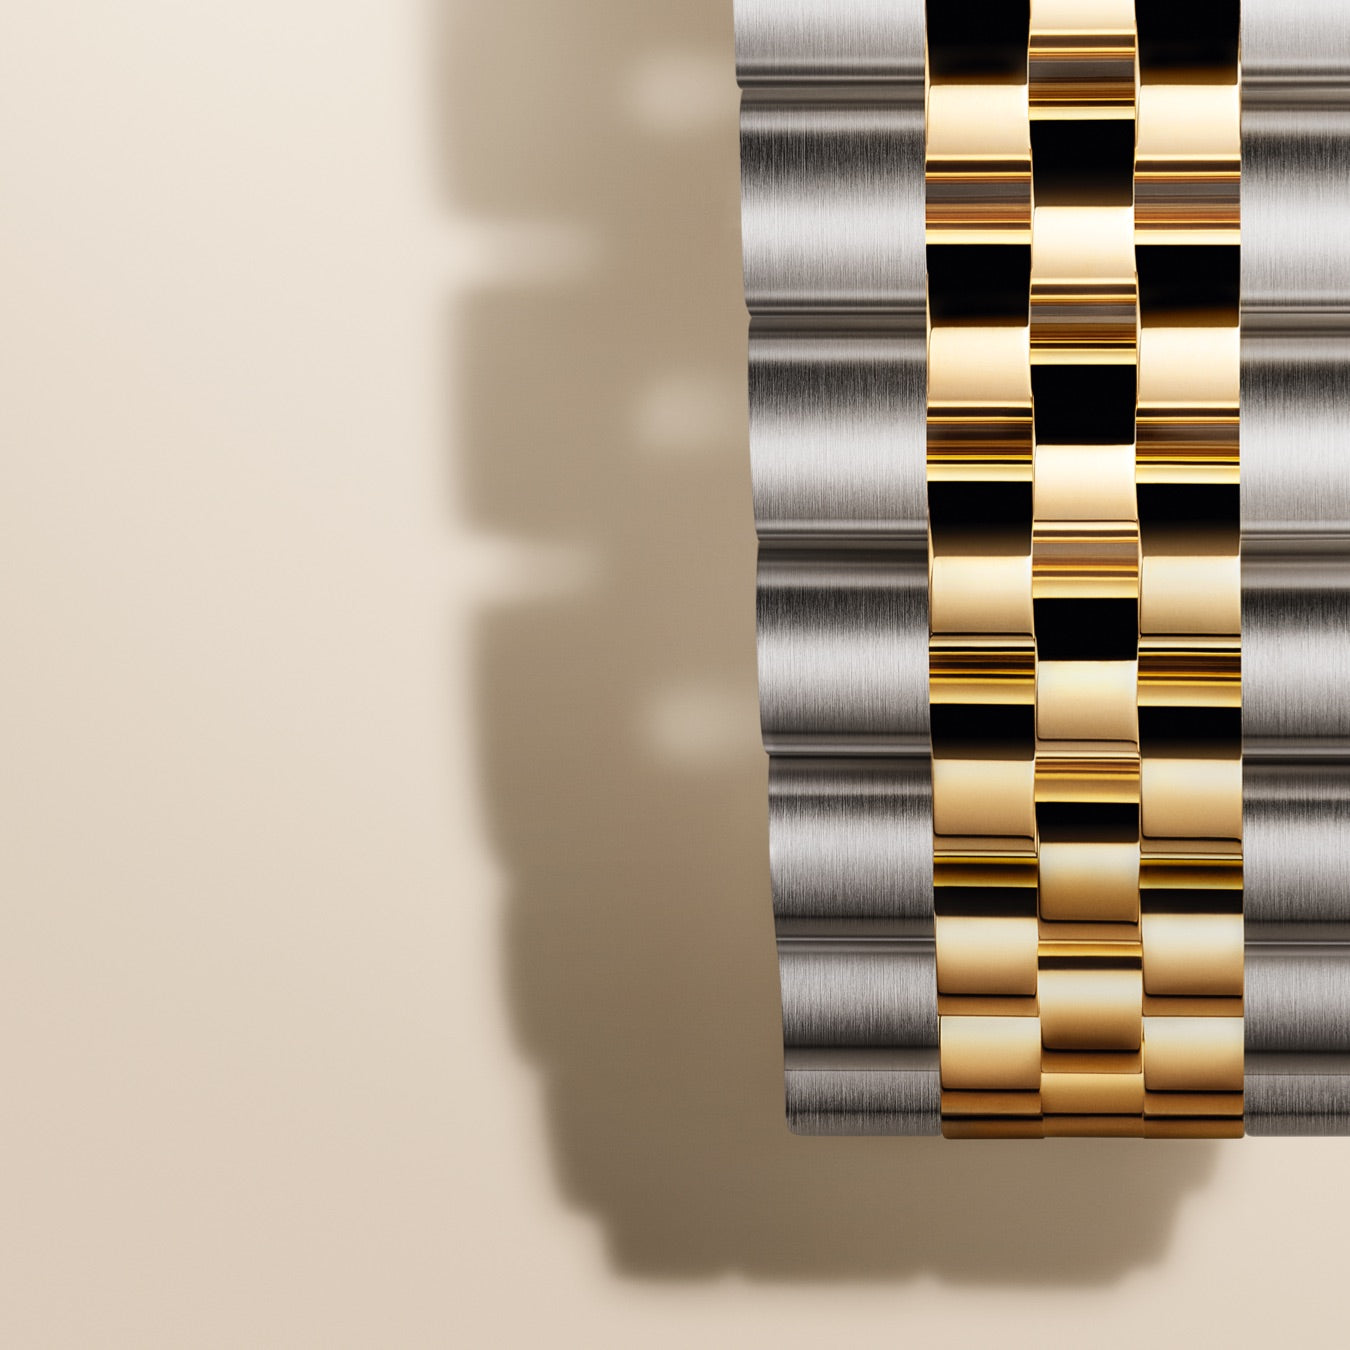 The Two-Tone Jubilee Bracelet on Rolex Datejust at Fink's Jewelers